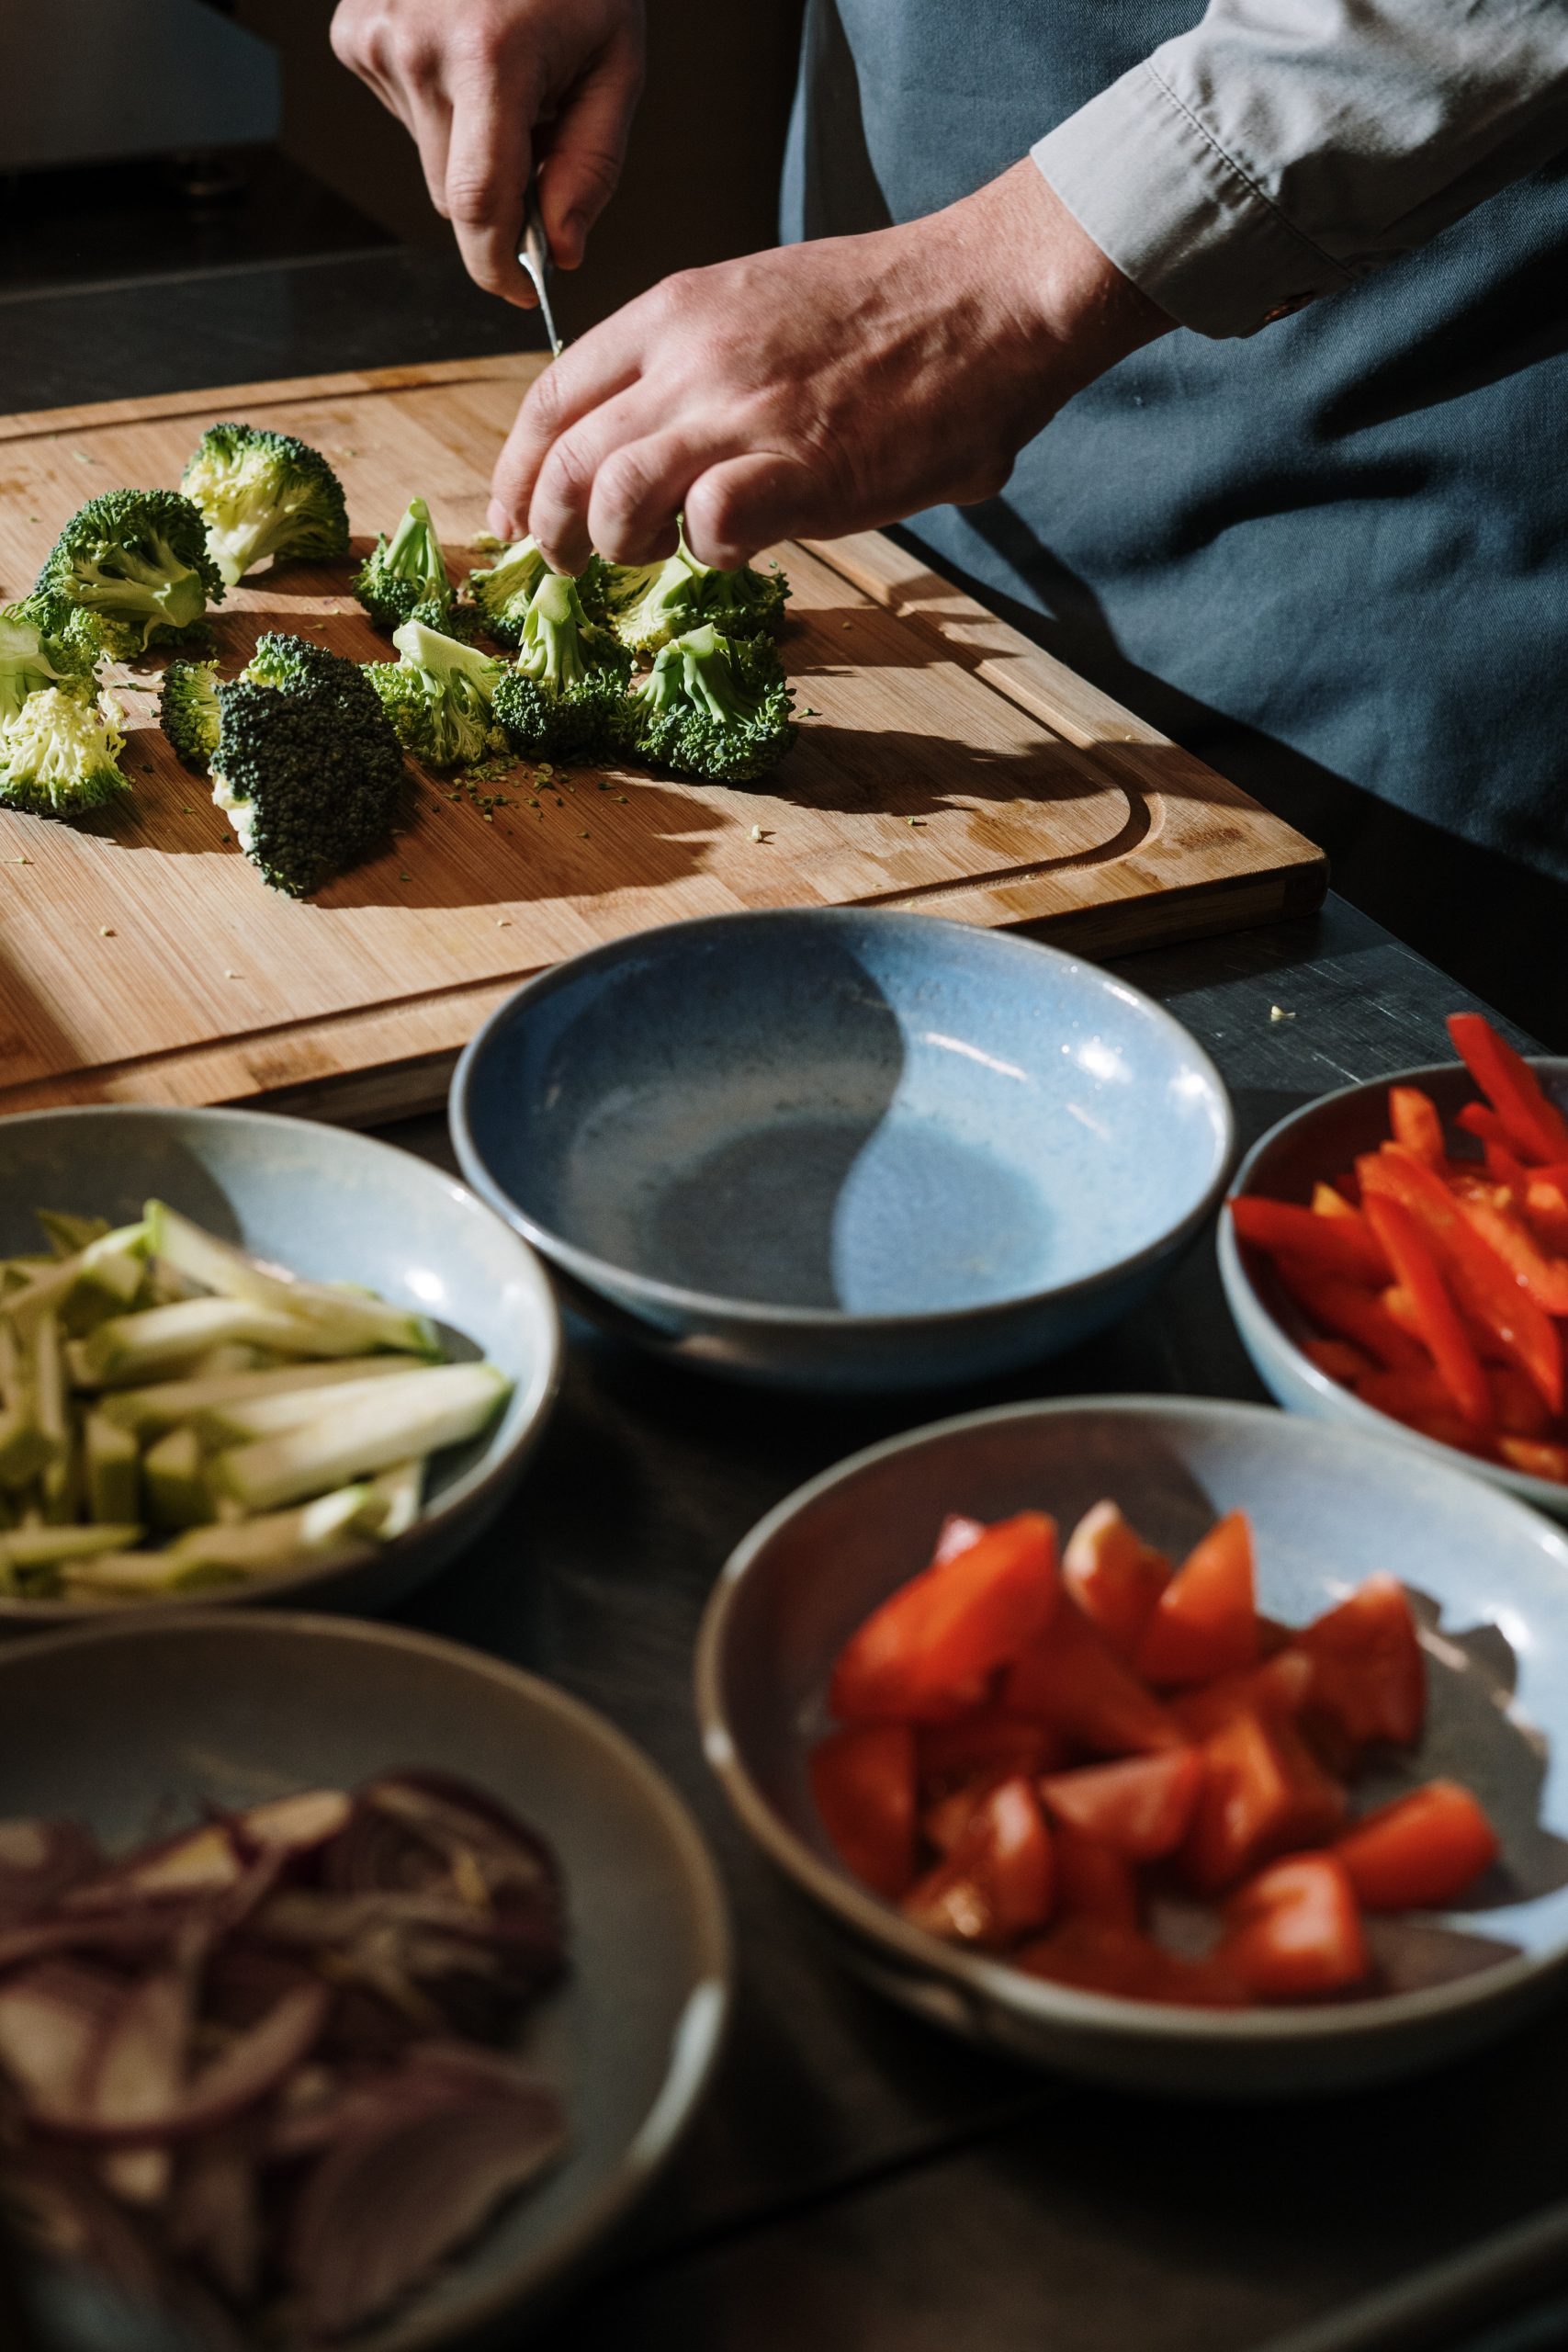 Cooking vegetables in a healthy way - Luna Cookware